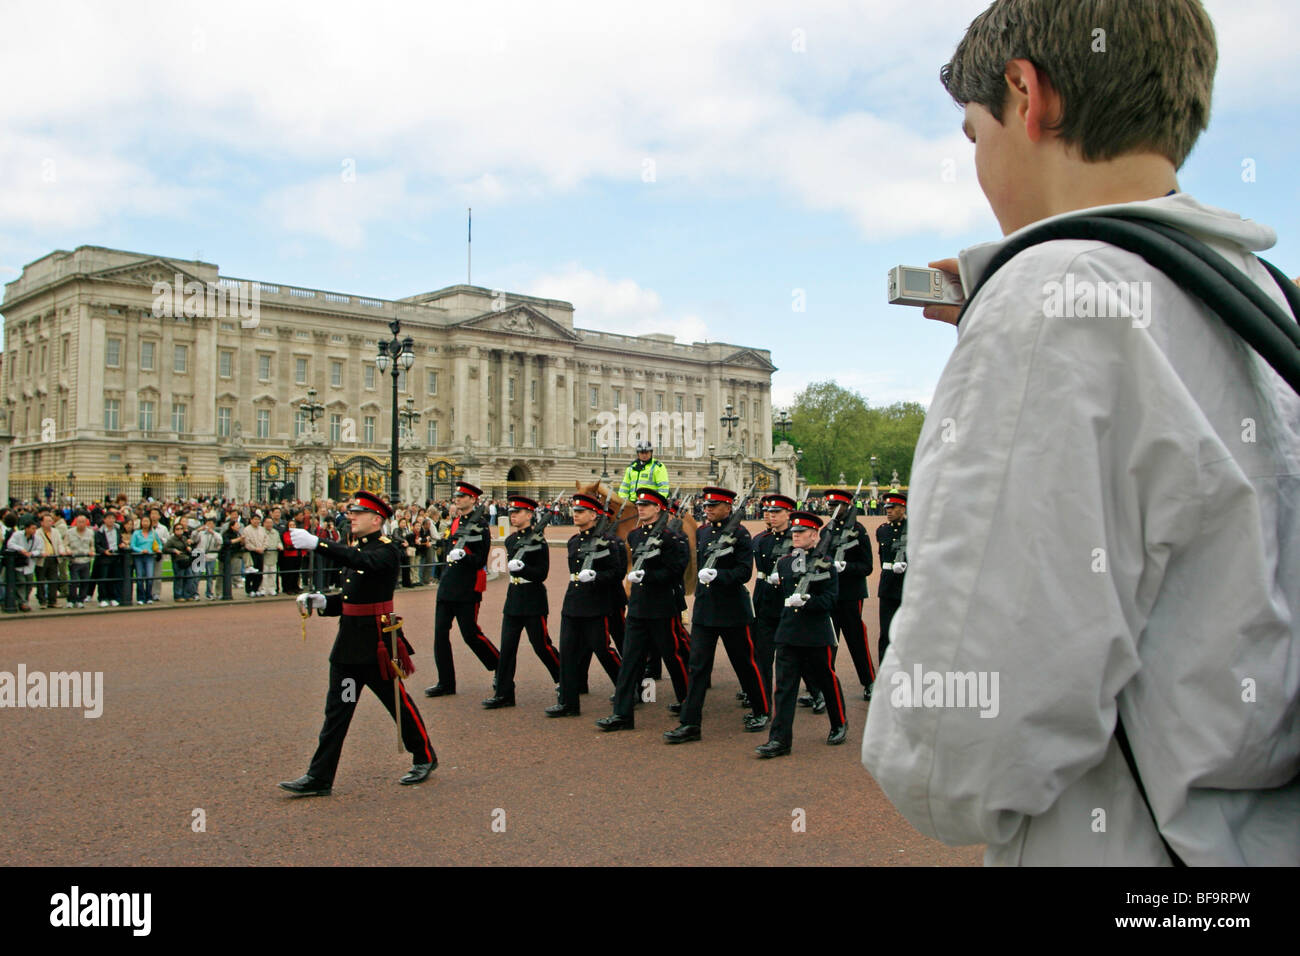 young boy taking pictures of the Changing of the Guard in front of Buckingham Palace, London, Great Britain Stock Photo